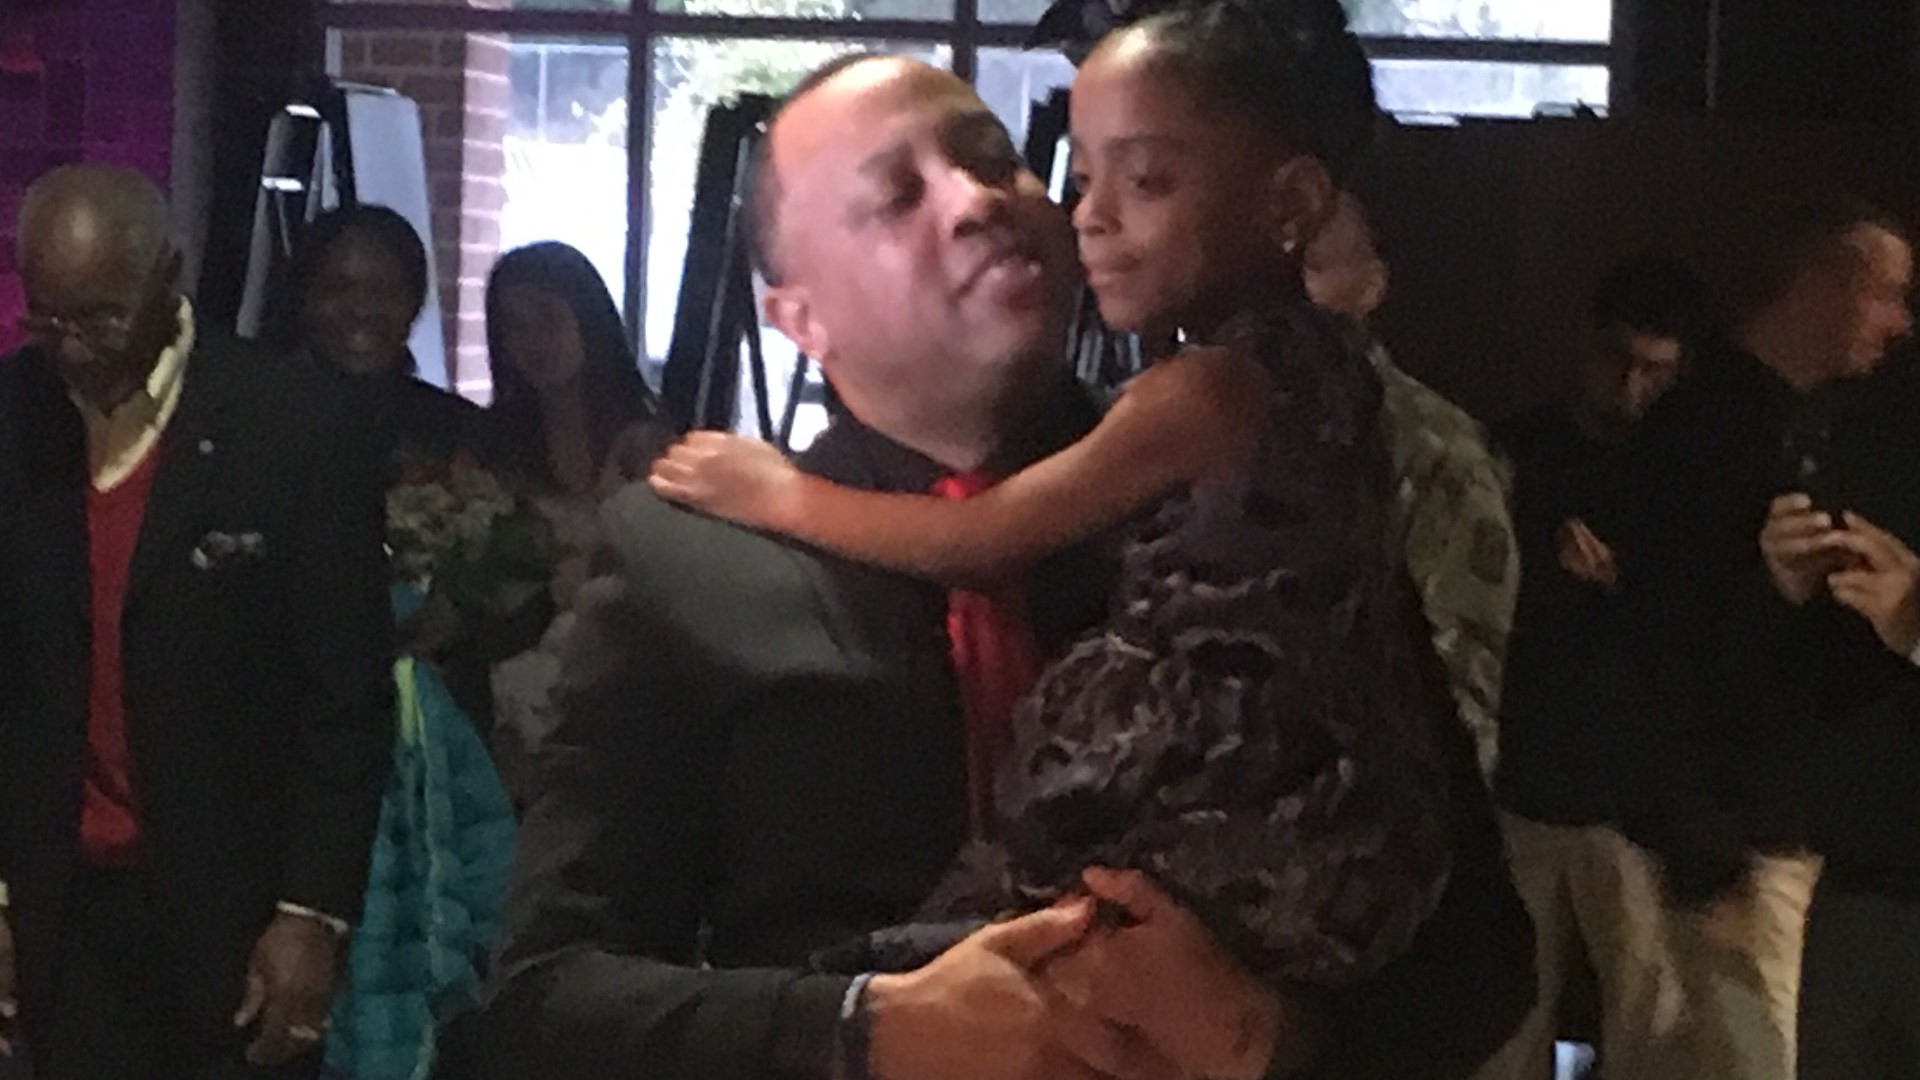 A Fort Hood soldier’s reunion surprise made a daddy-daughter dance at a local elementary school even more special Thursday evening. 

For the past nine months, Chief Warrant Officer Marcus Barnes of the 1st Armor Brigade Combat Team, 1st Cavalry Division was overseas serving the nation in Poland.